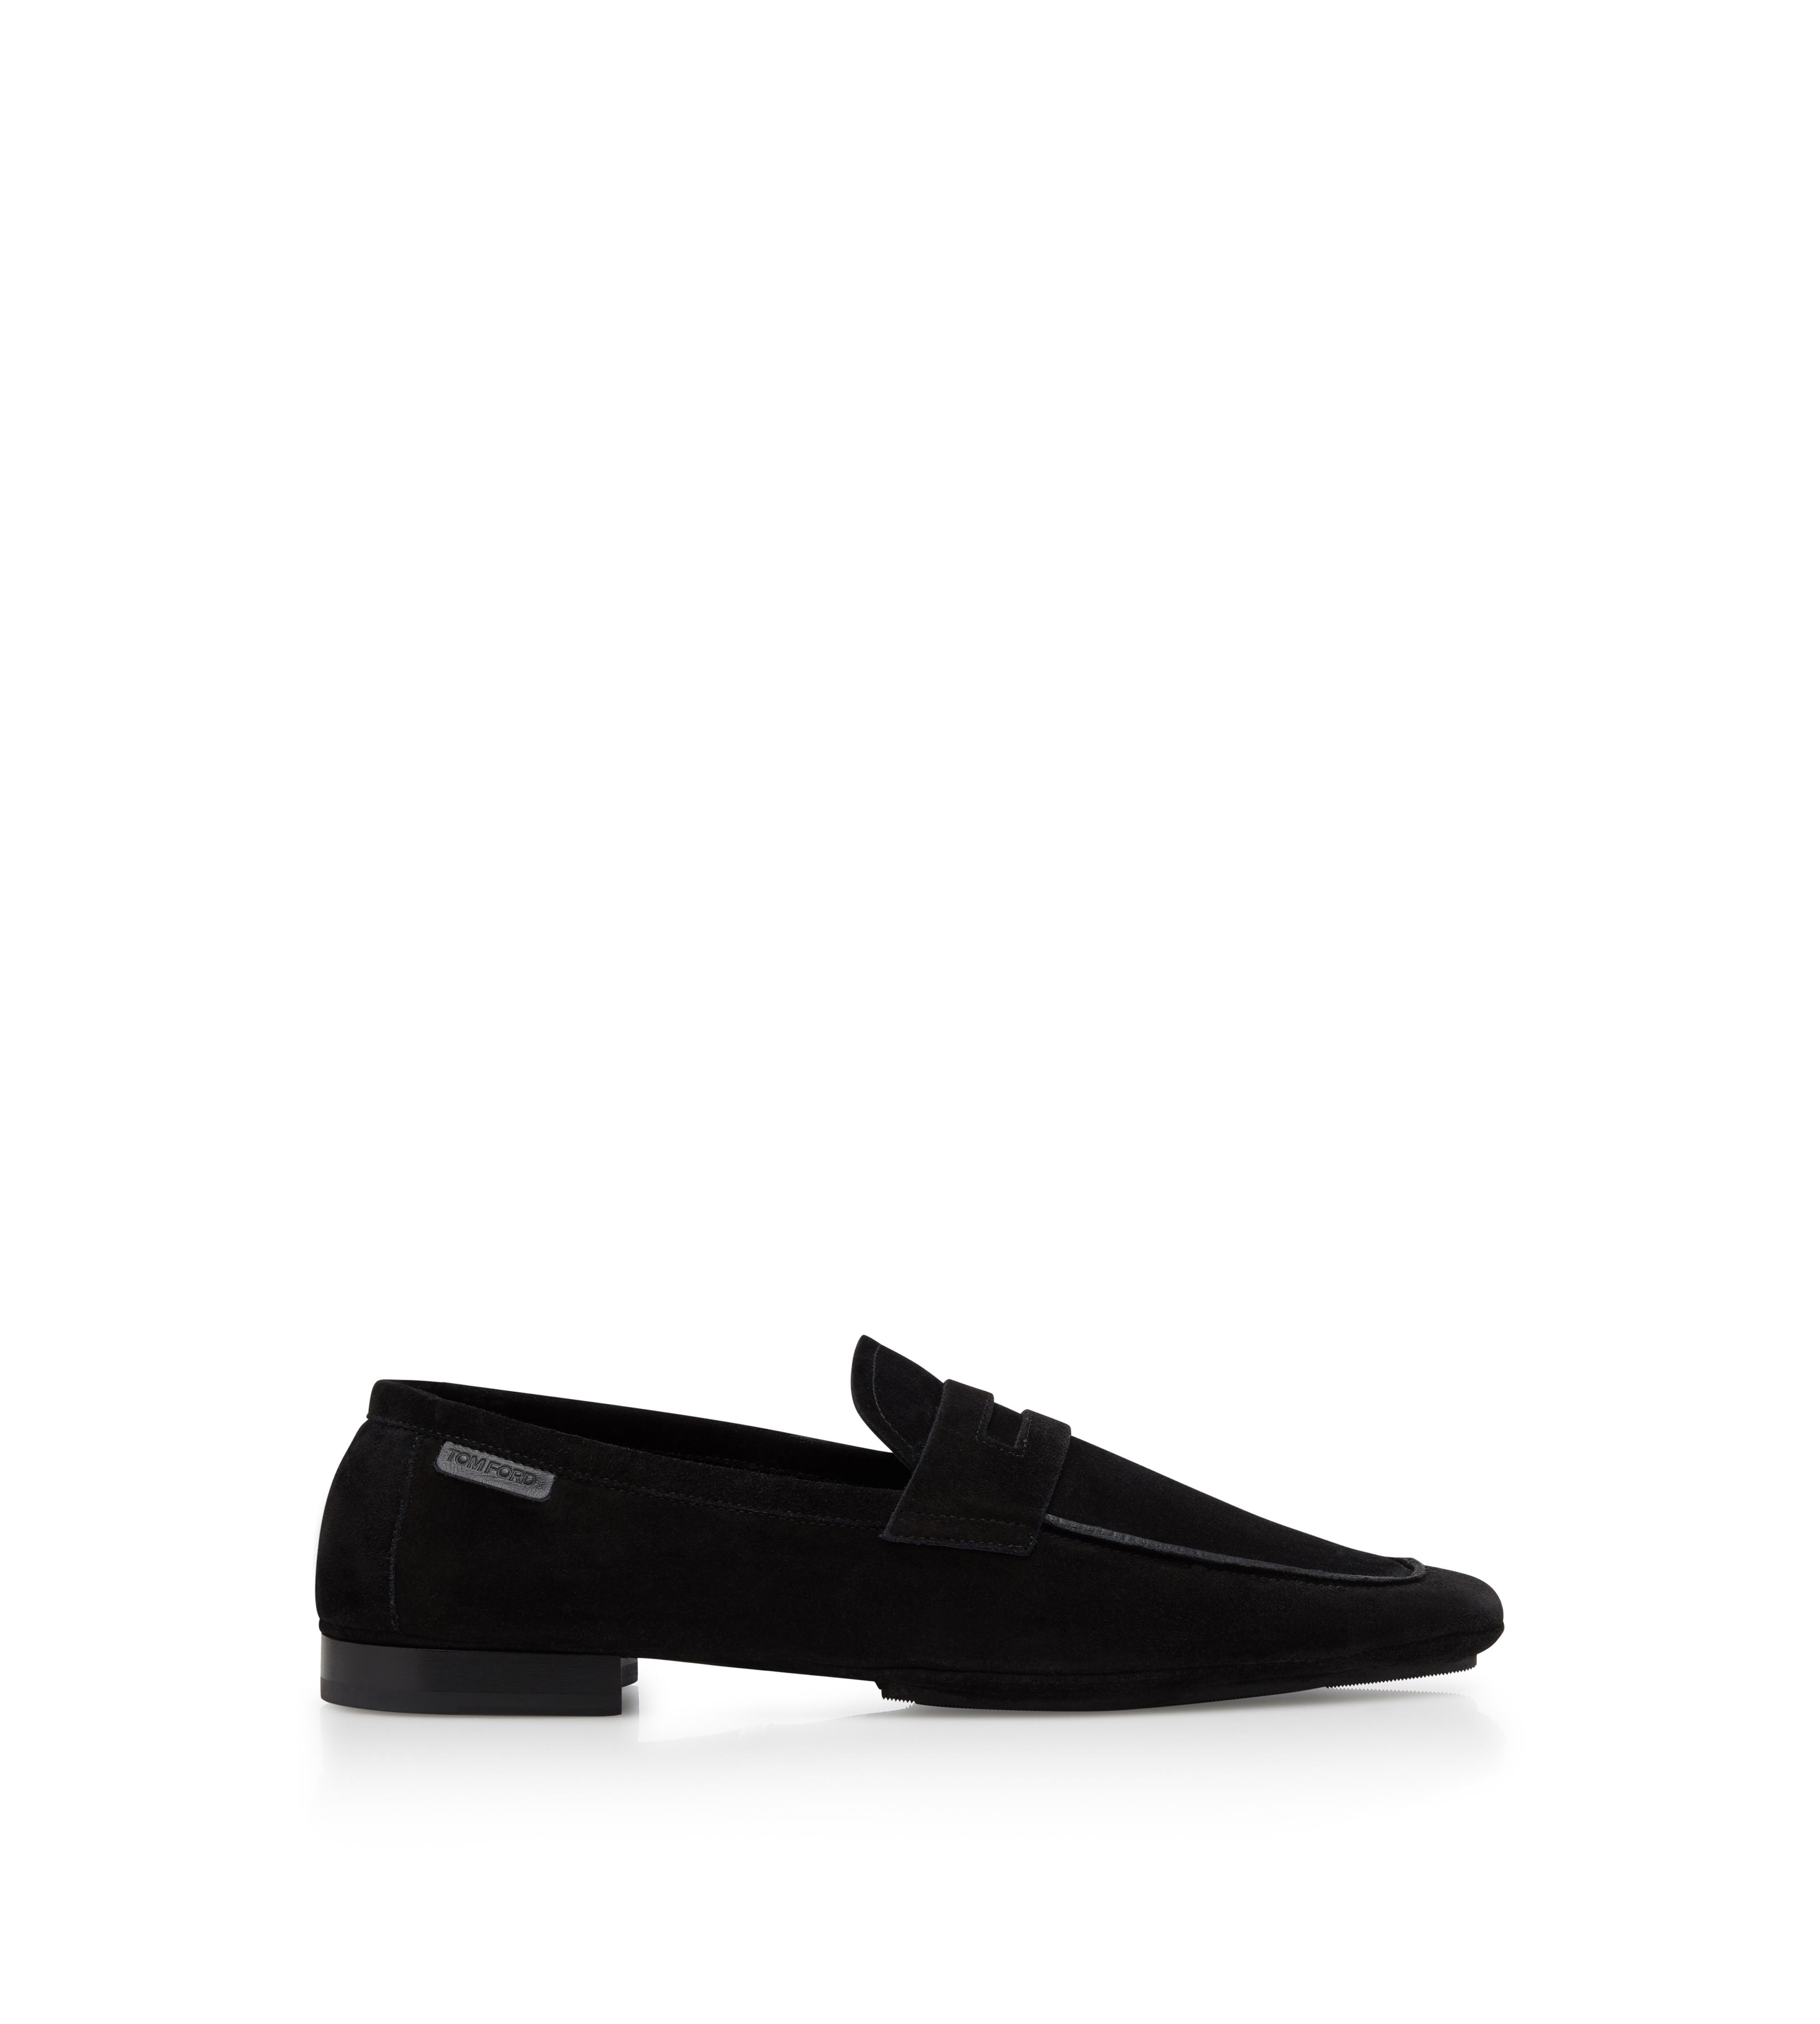 Loafers Men's Shoes | TomFord.com